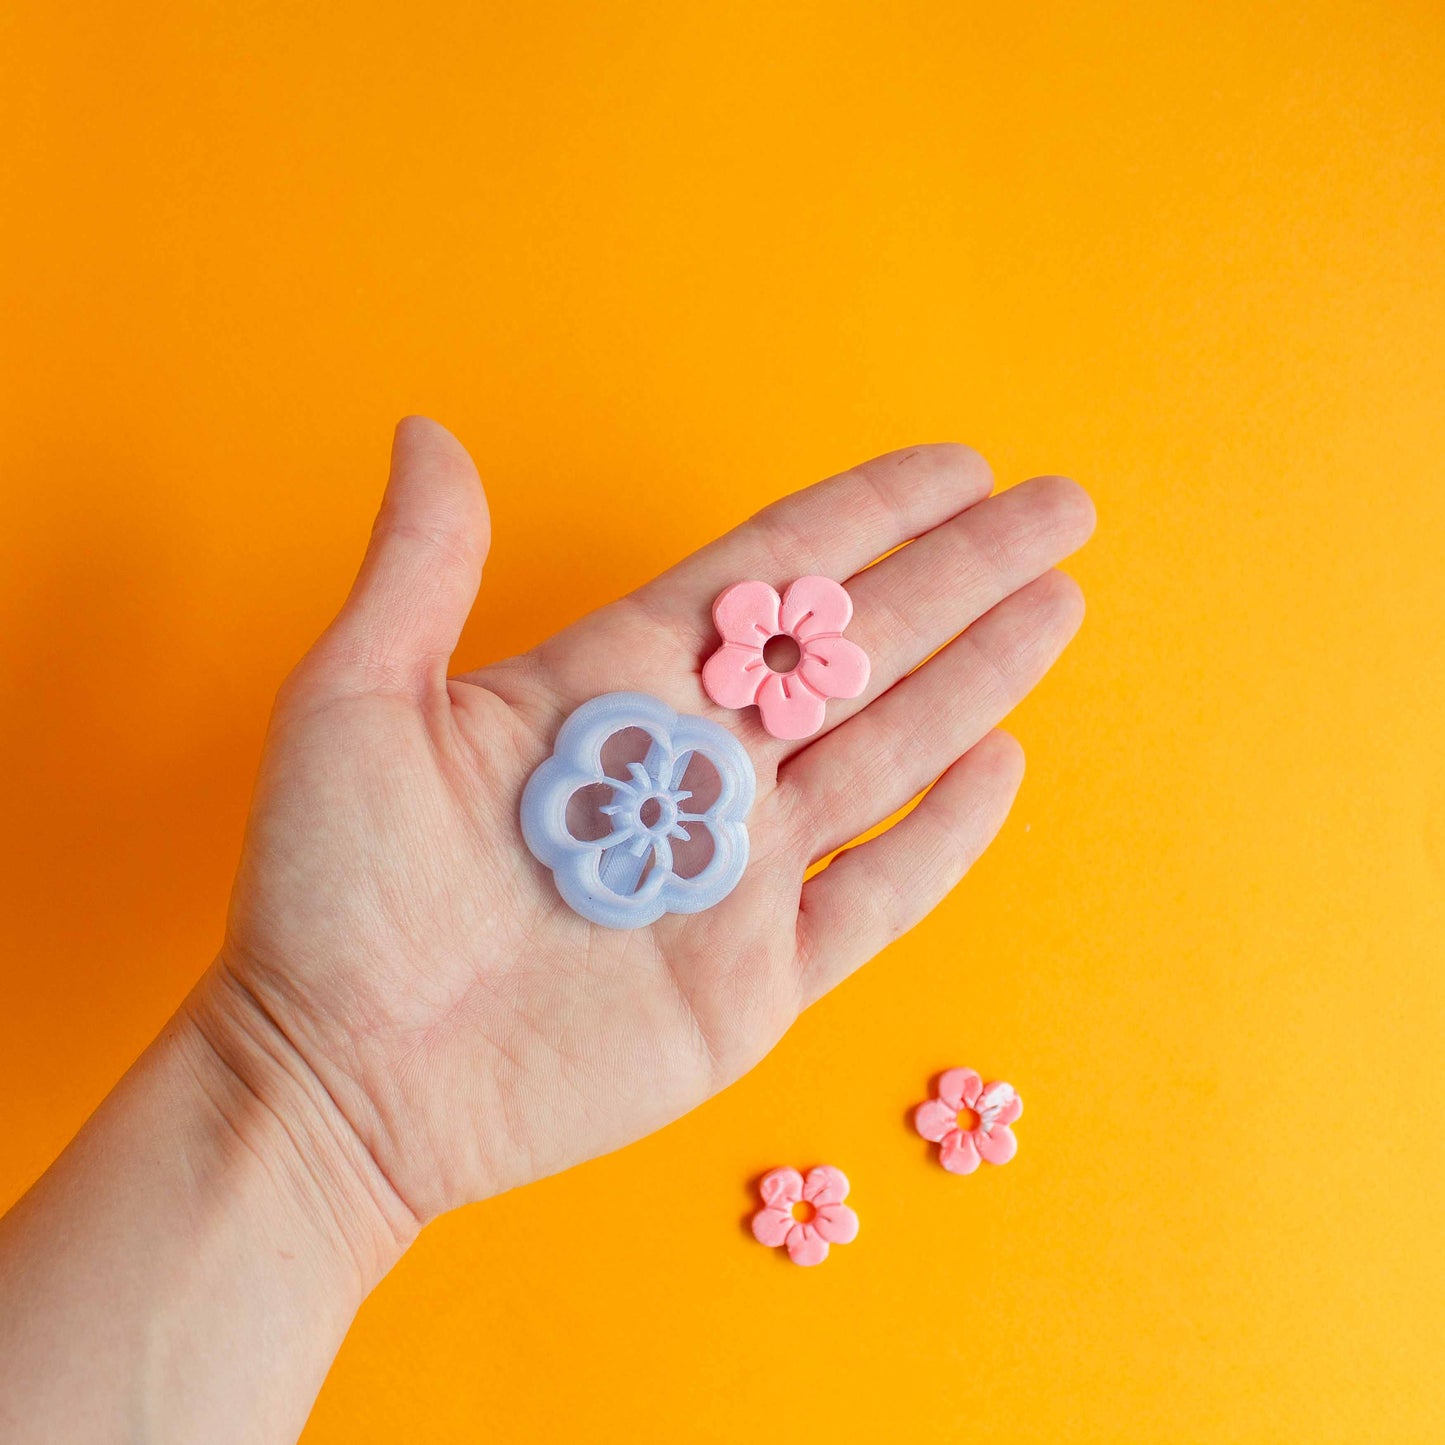 FLower shaped cutter and polymer clay flower displayed on a hand, and two smaller sized clay flowers